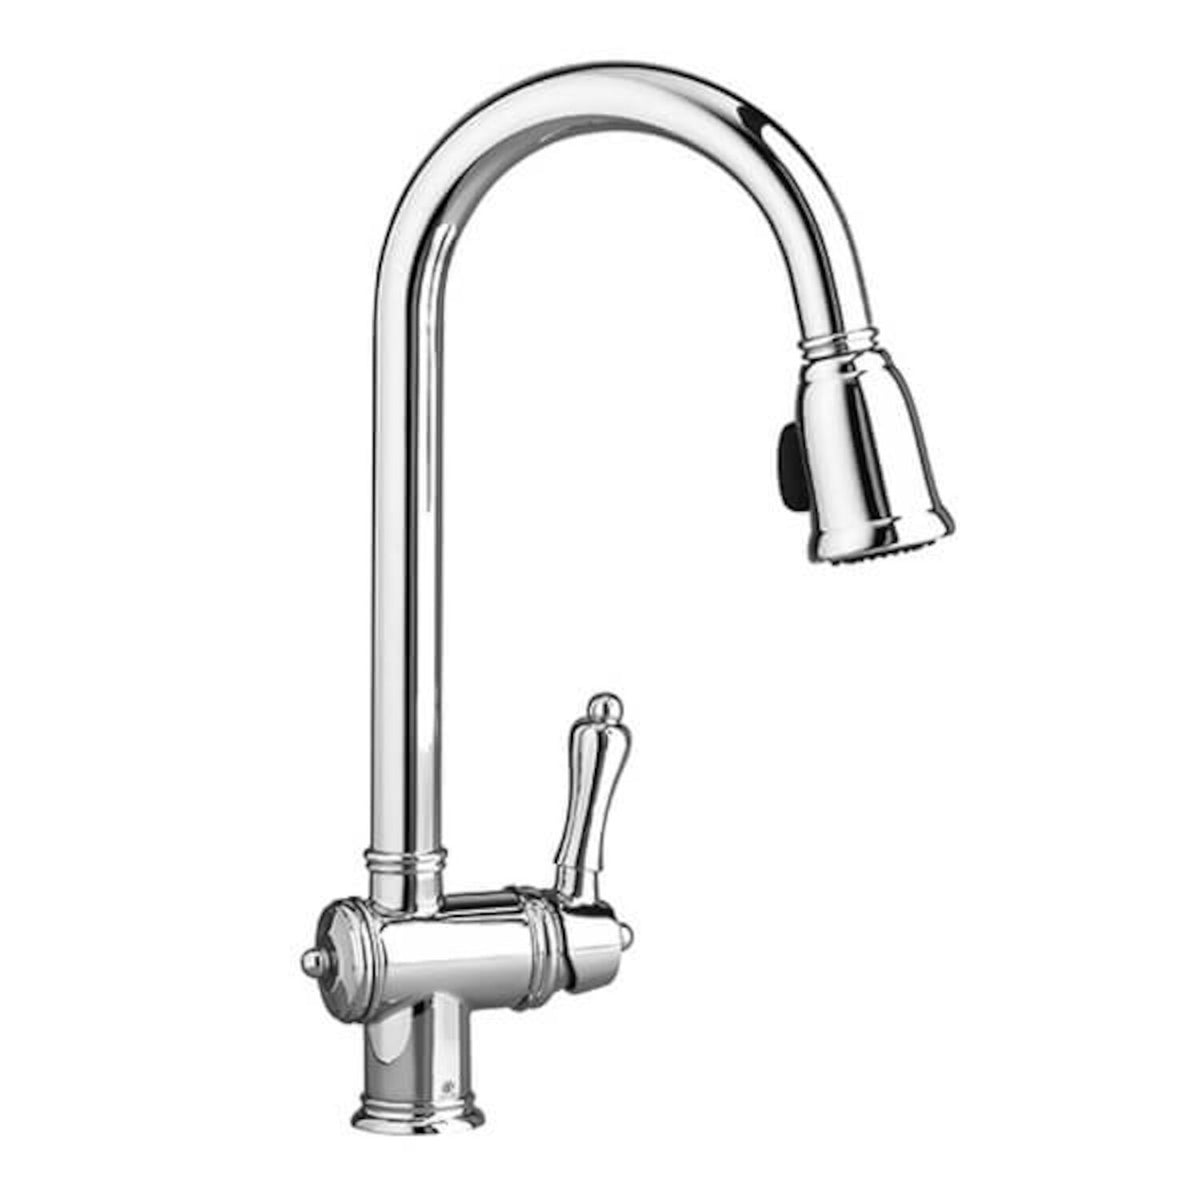 VICTORIAN PULL-DOWN KITCHEN FAUCET